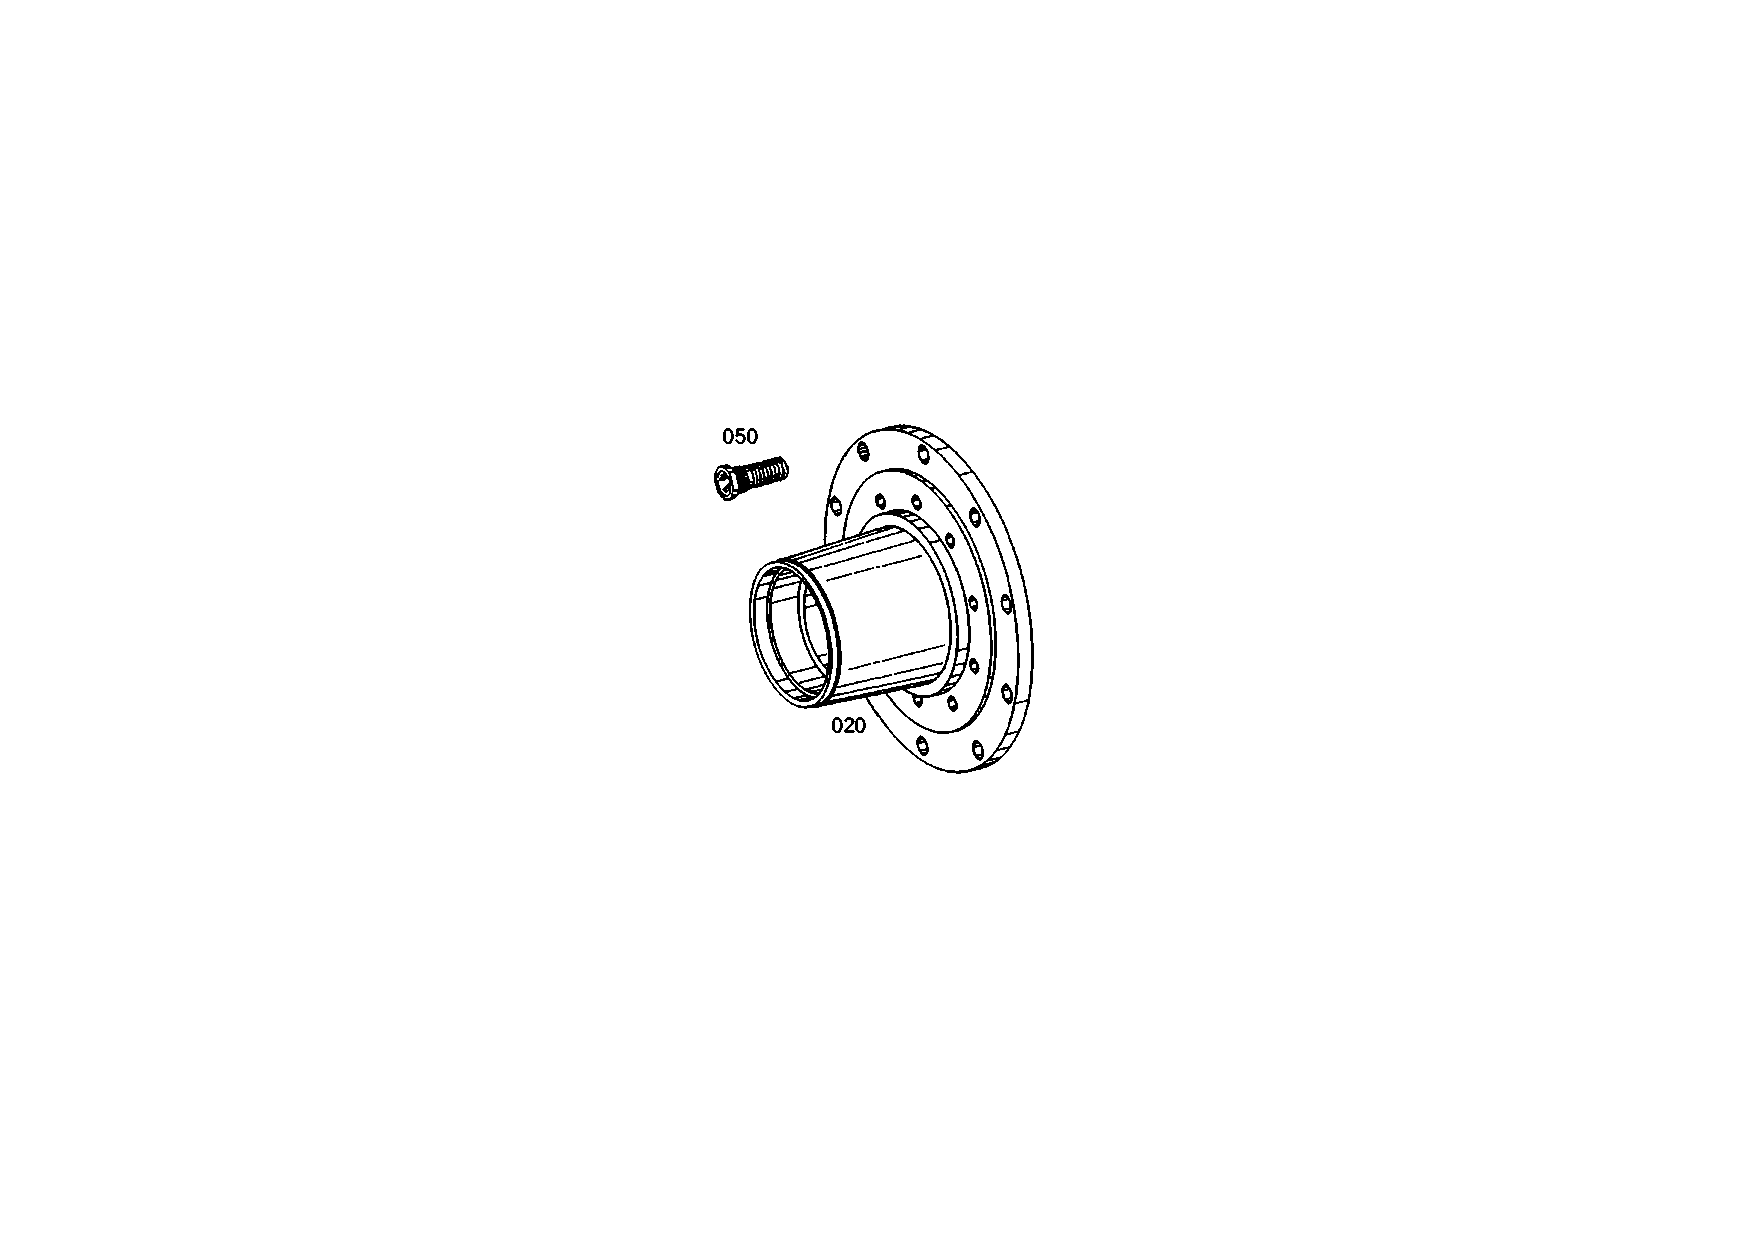 drawing for CNH NEW HOLLAND 4612213 - WHEEL STUD (figure 4)